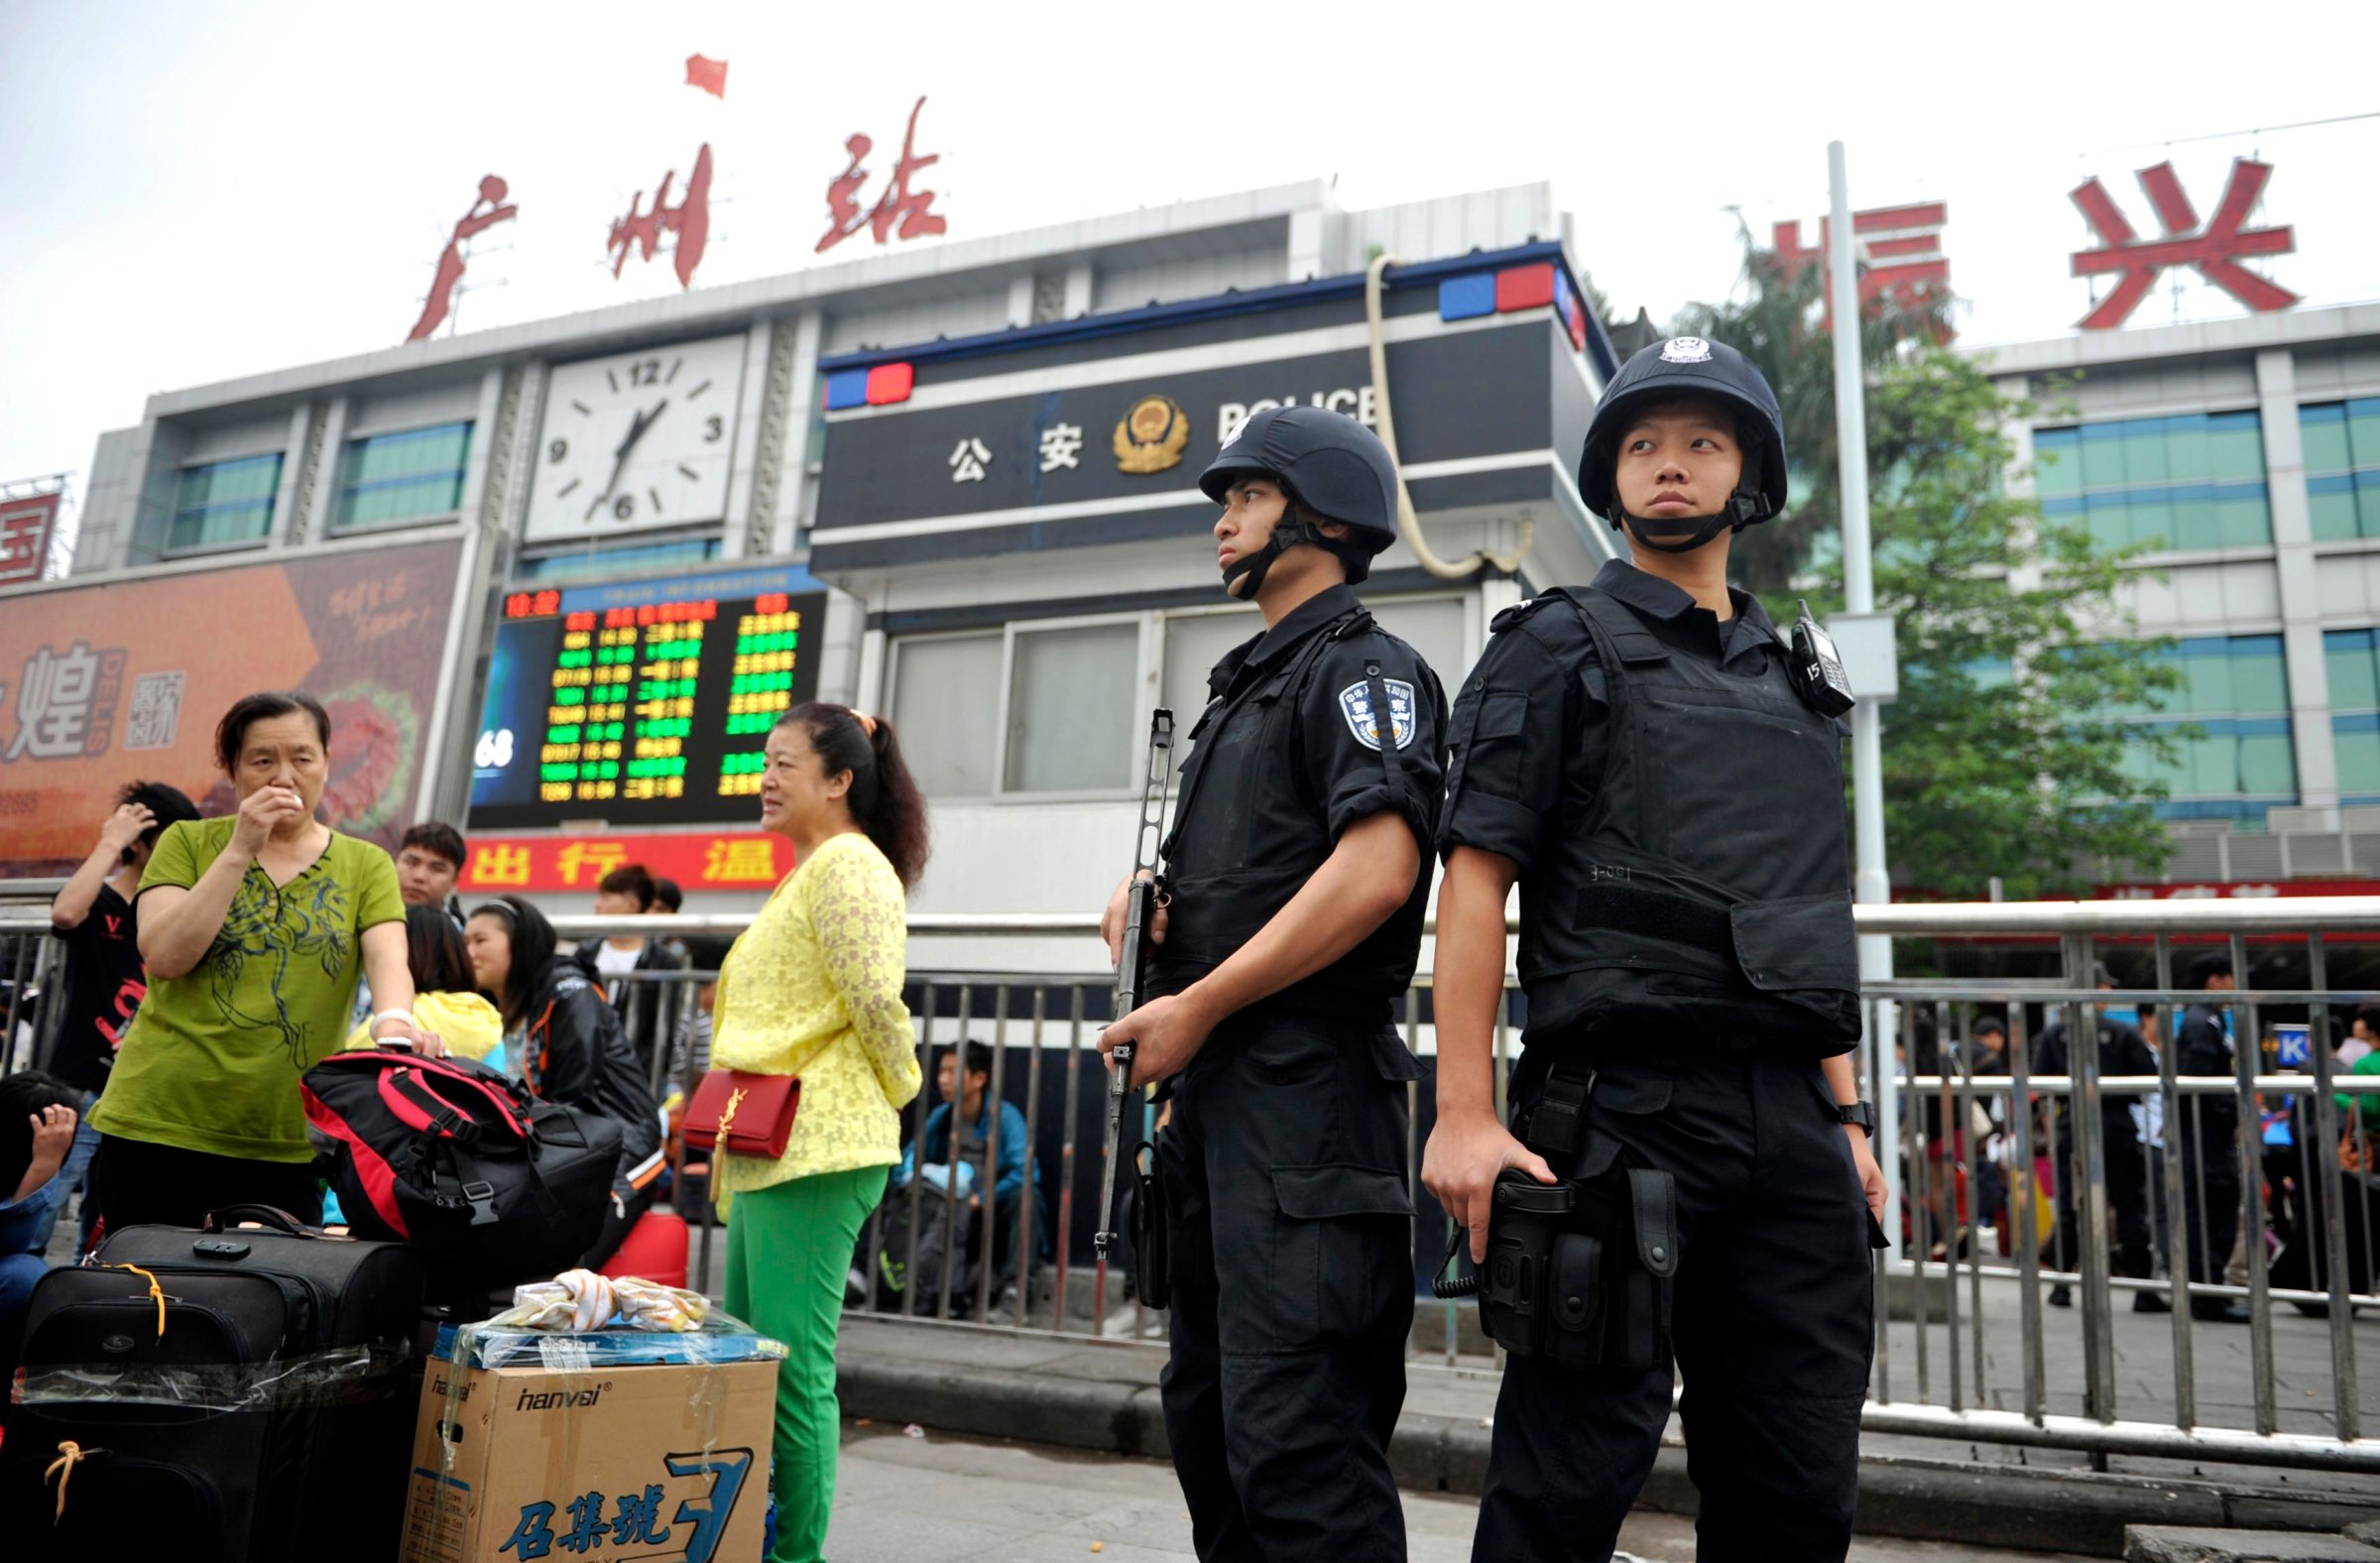 Armed policemen stand guard next to passengers after a knife attack at a railway station in Guangzhou, Guangdong province May 6, 2014.